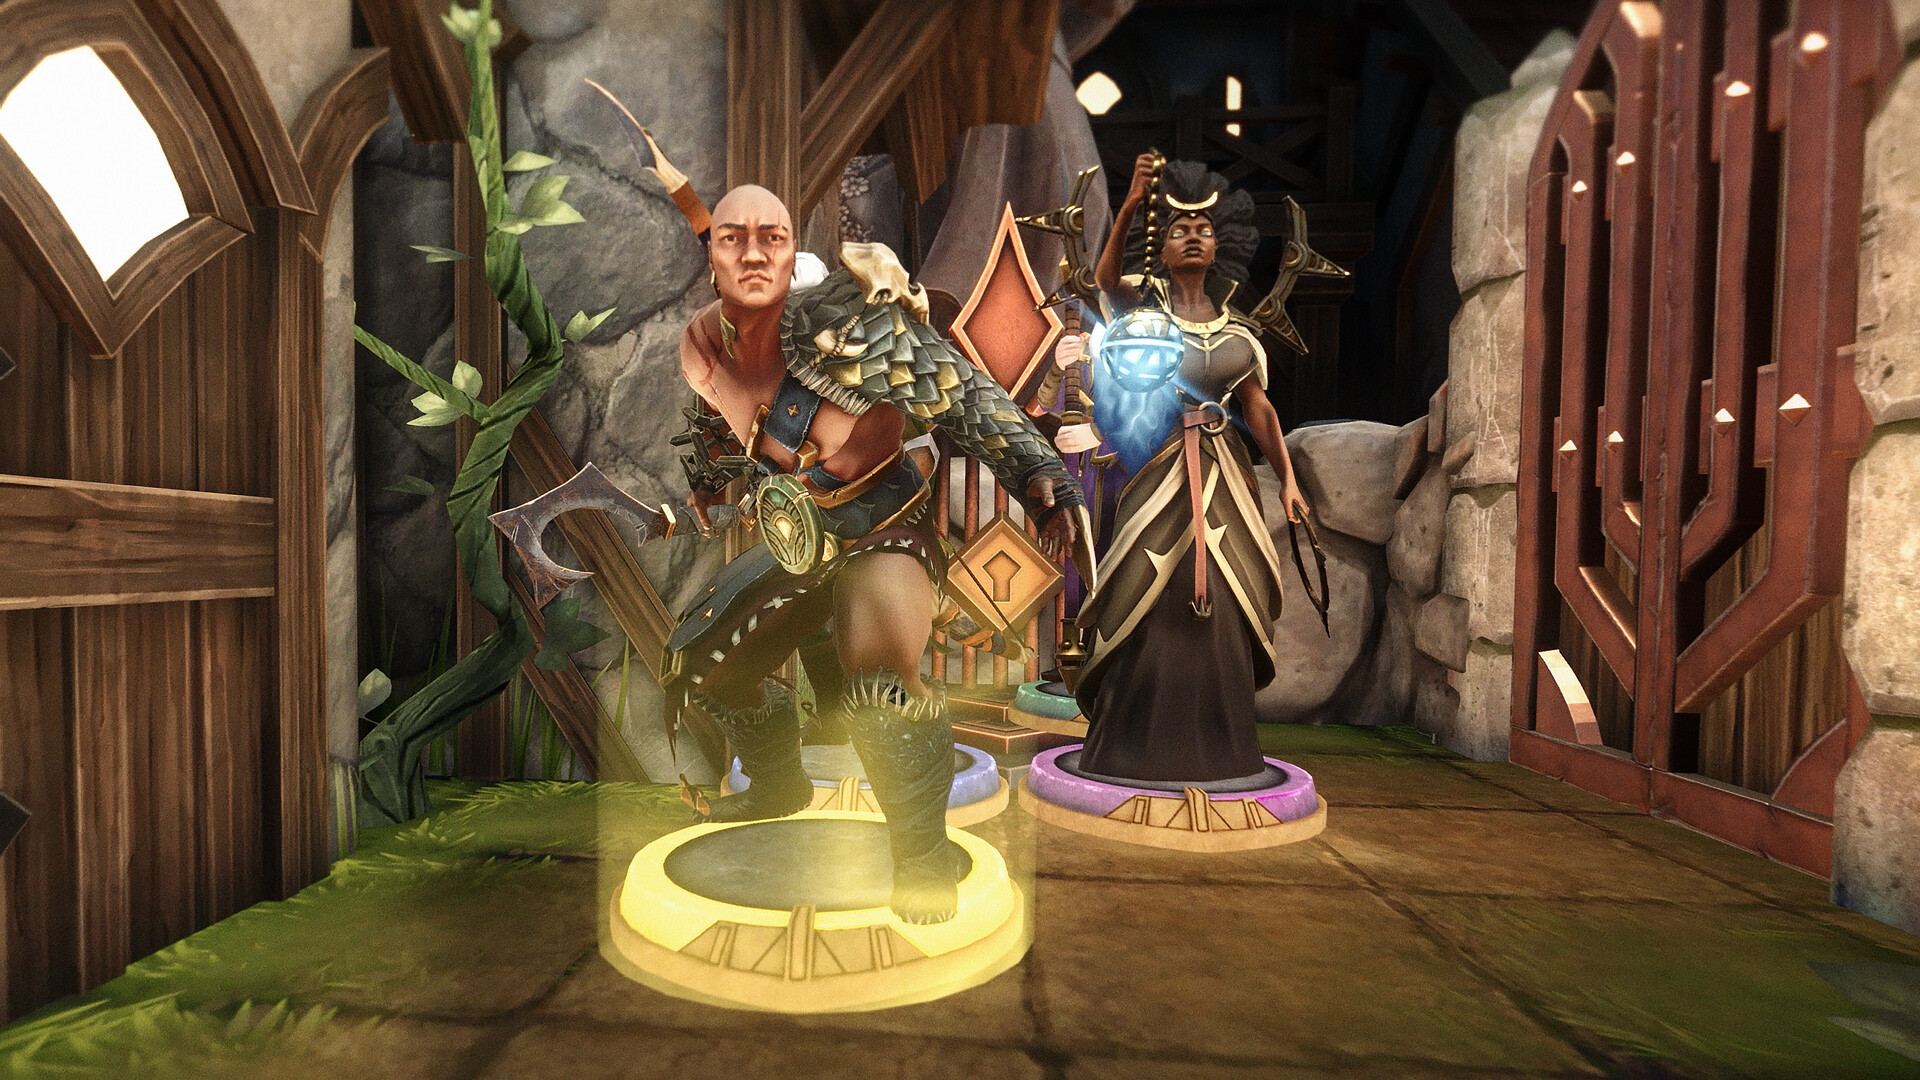 Dungeons and Dragons is coming to VR